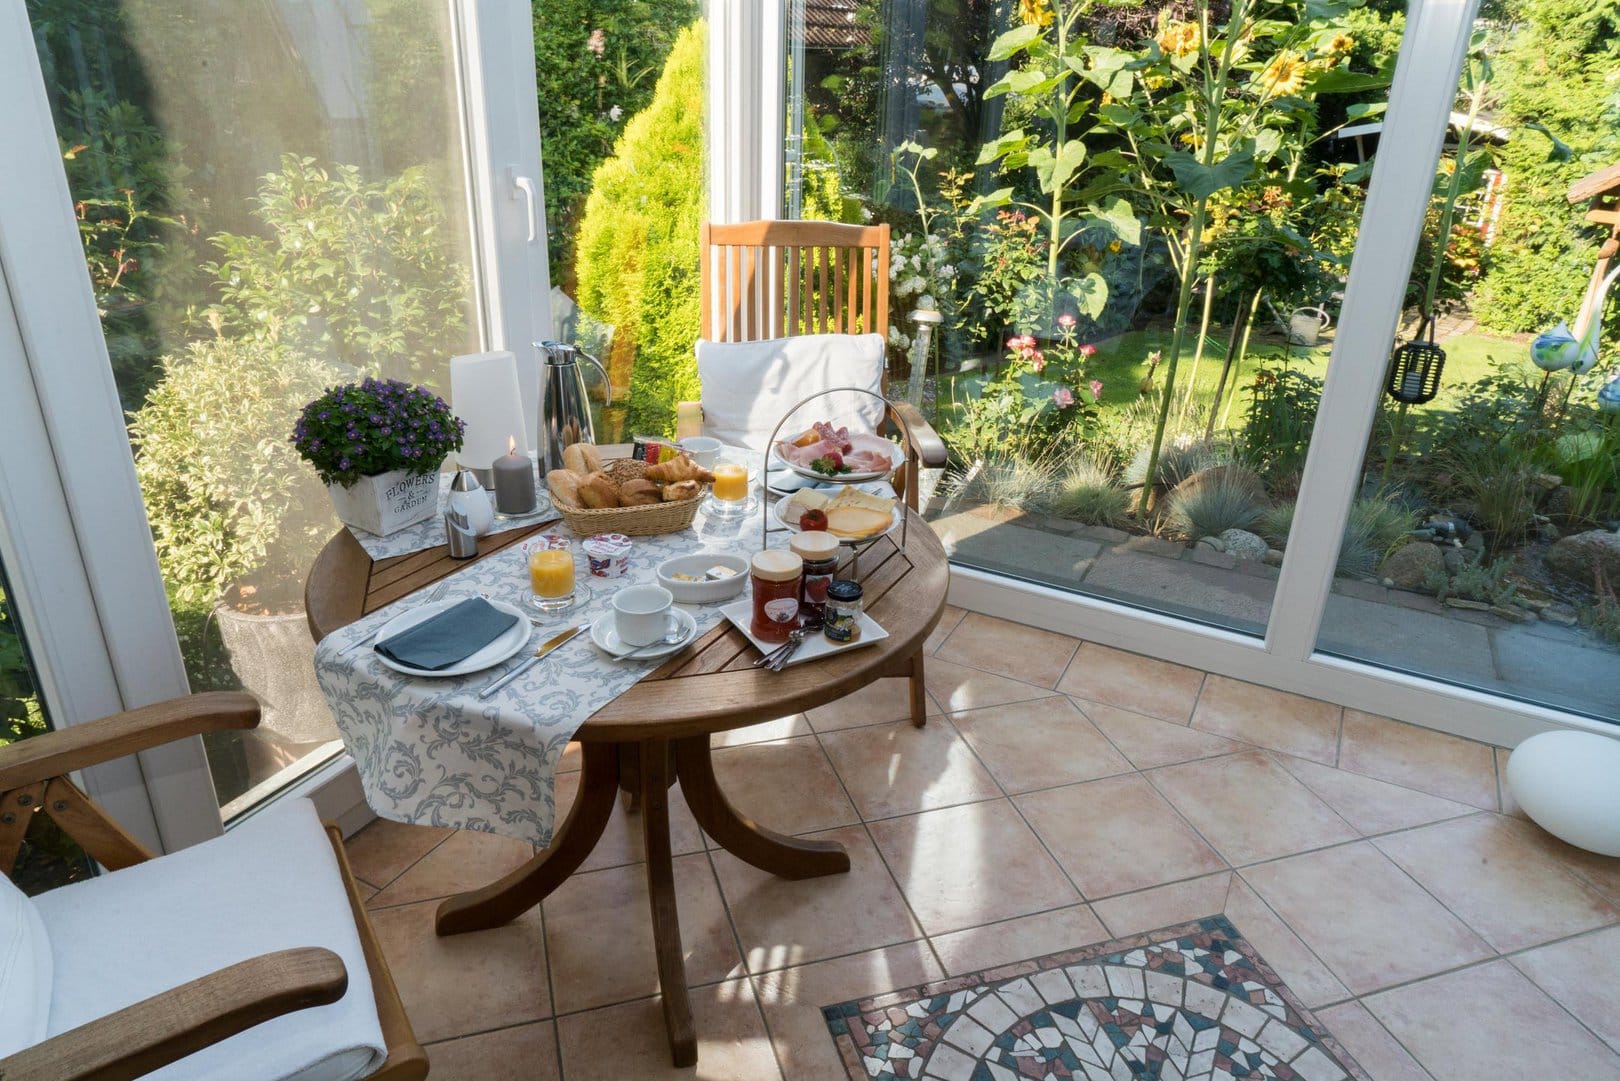 A wooden table set with a selection of breads, meat and cheese, as well as various jams, yoghurts and coffee. The table stands in a wintergarden, which is surrounded by a green garden.